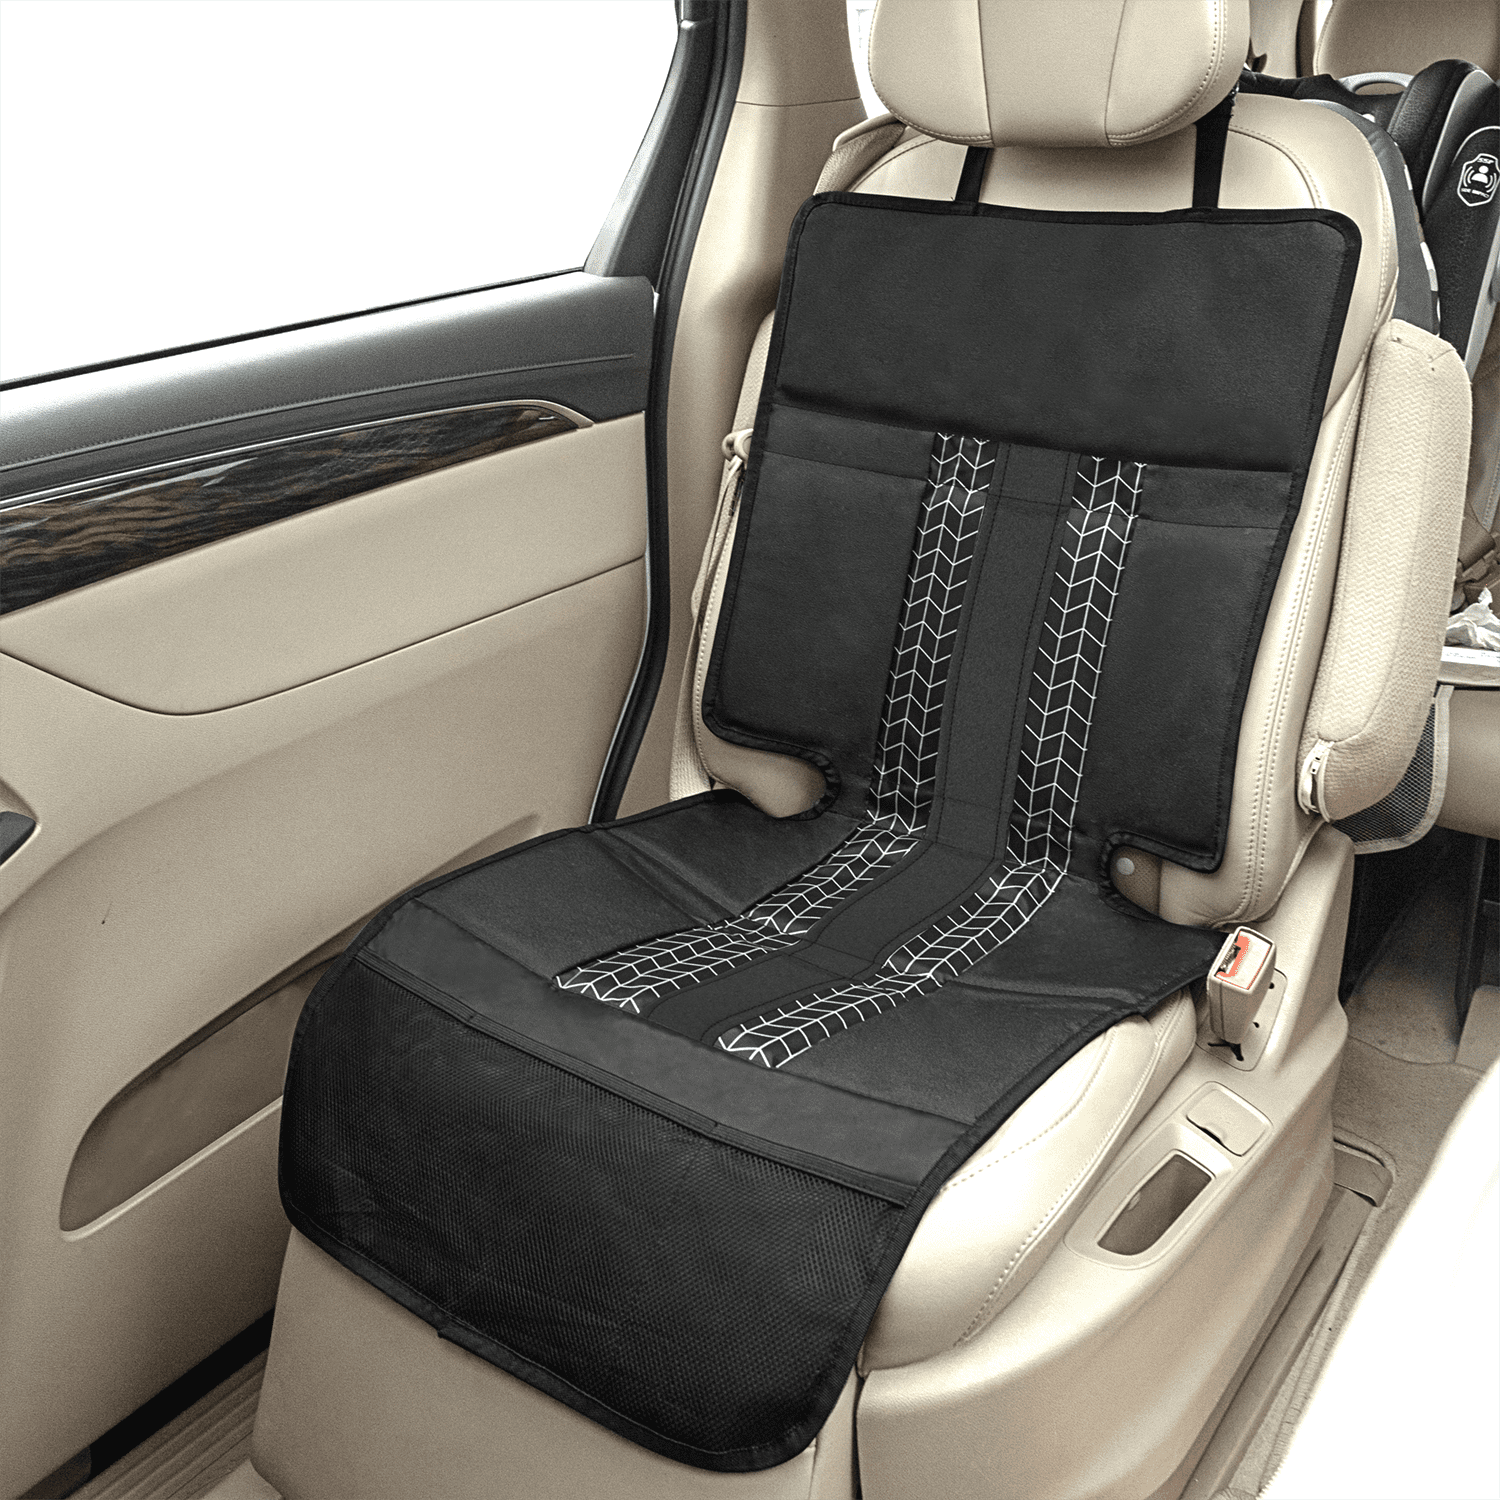 Venture Universal Dry Seat Protector For Car Seats and Pushchairs/Strollers 